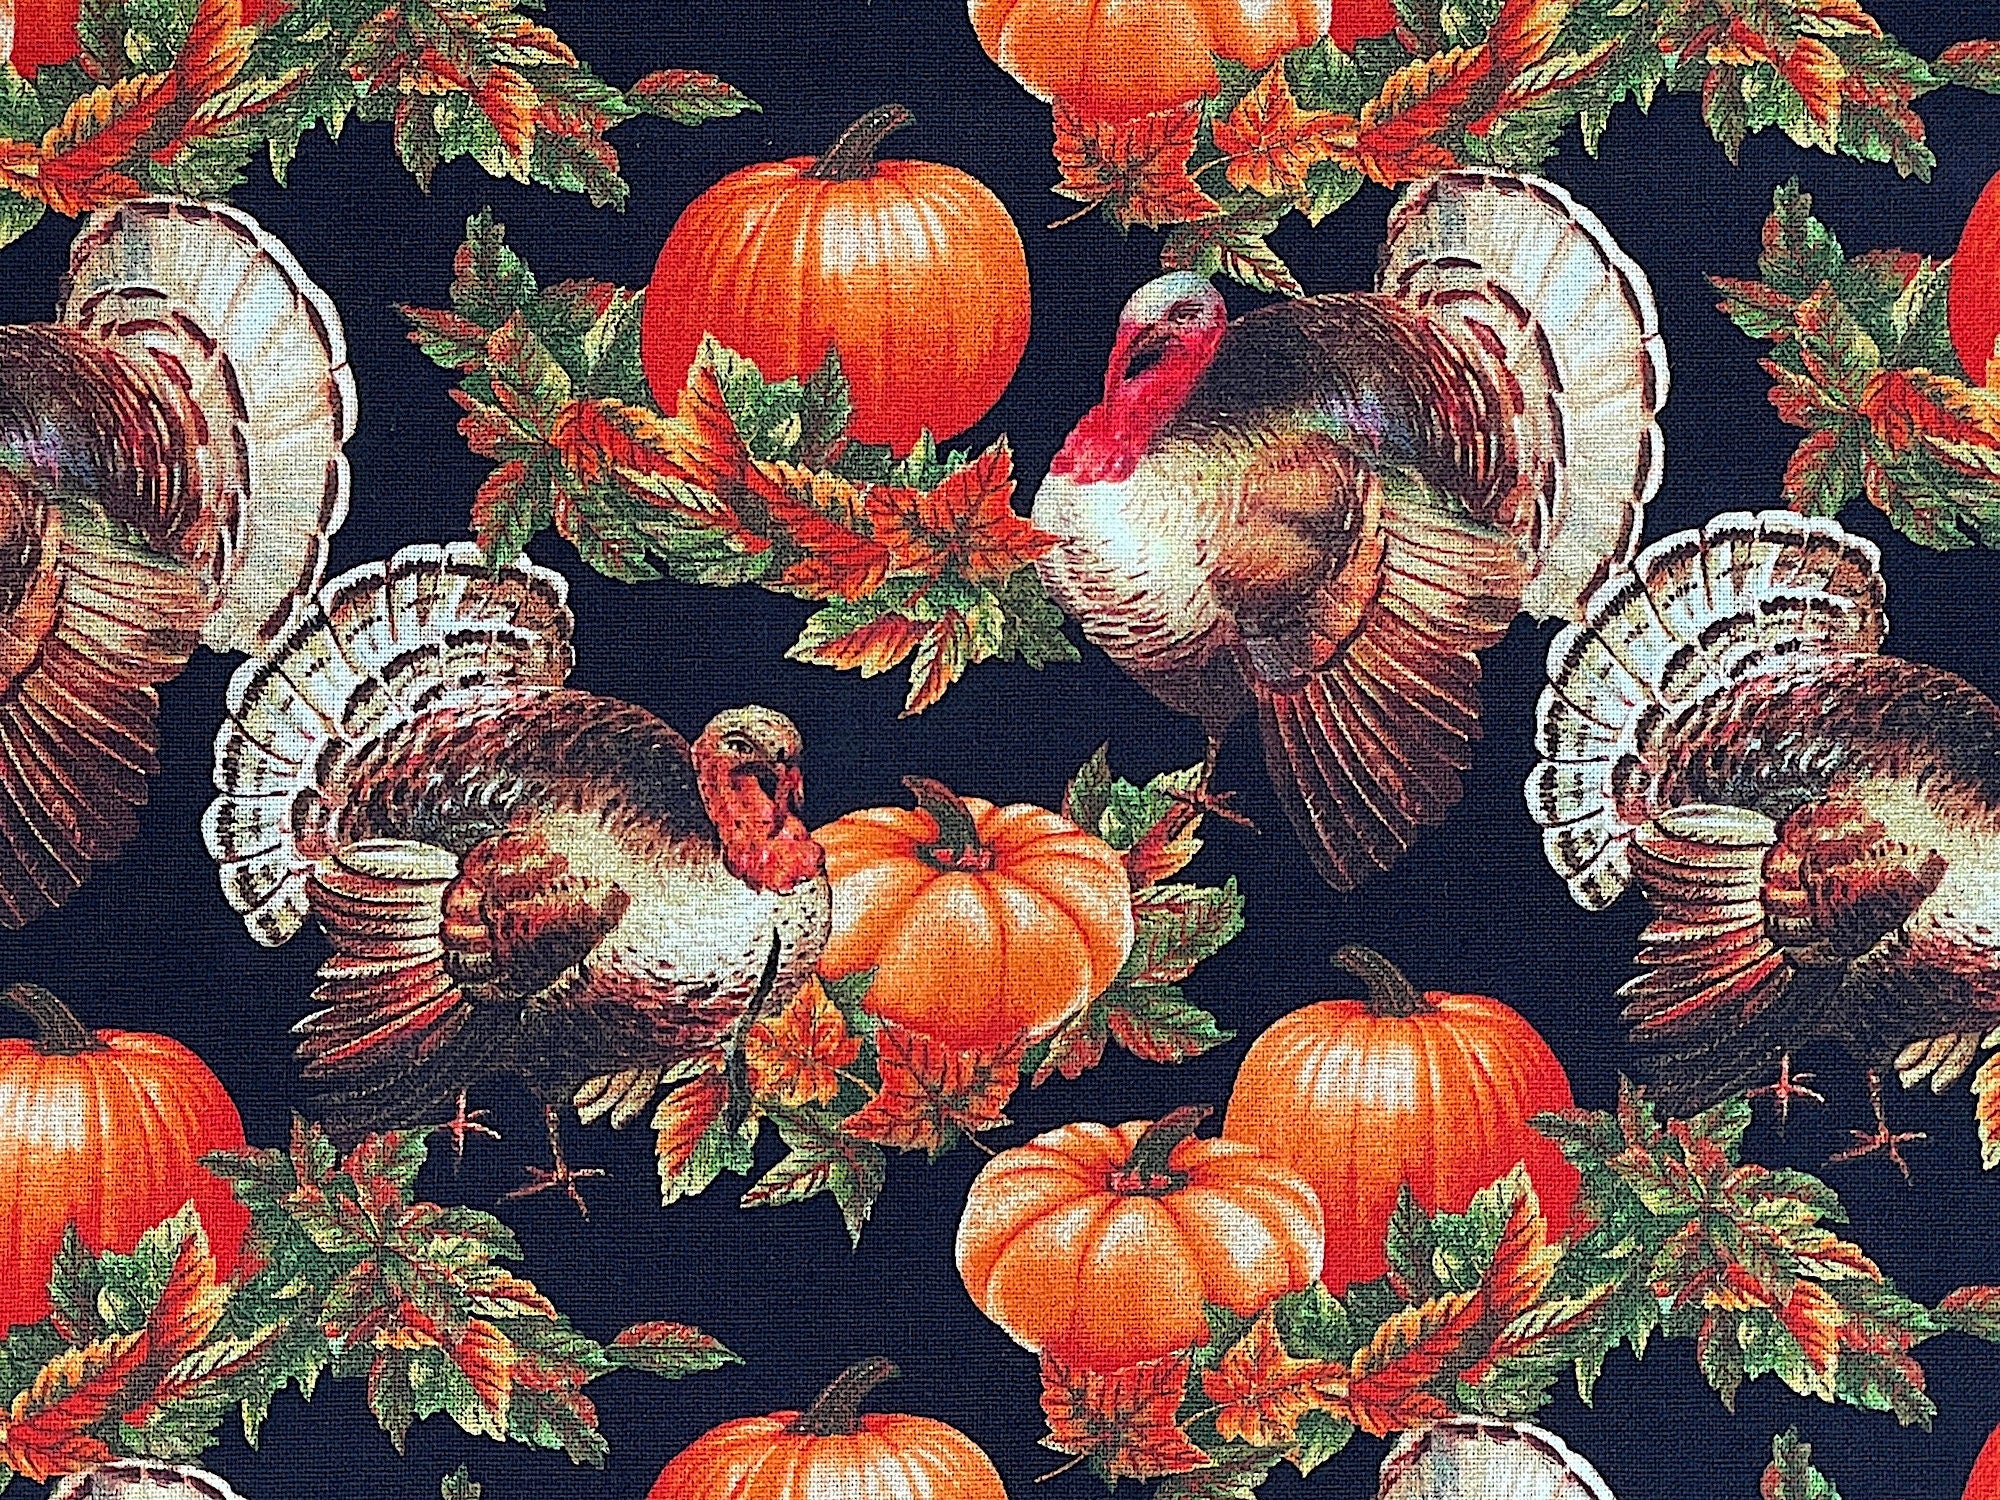 Close up of turkeys, pumpkins and fall leaves.